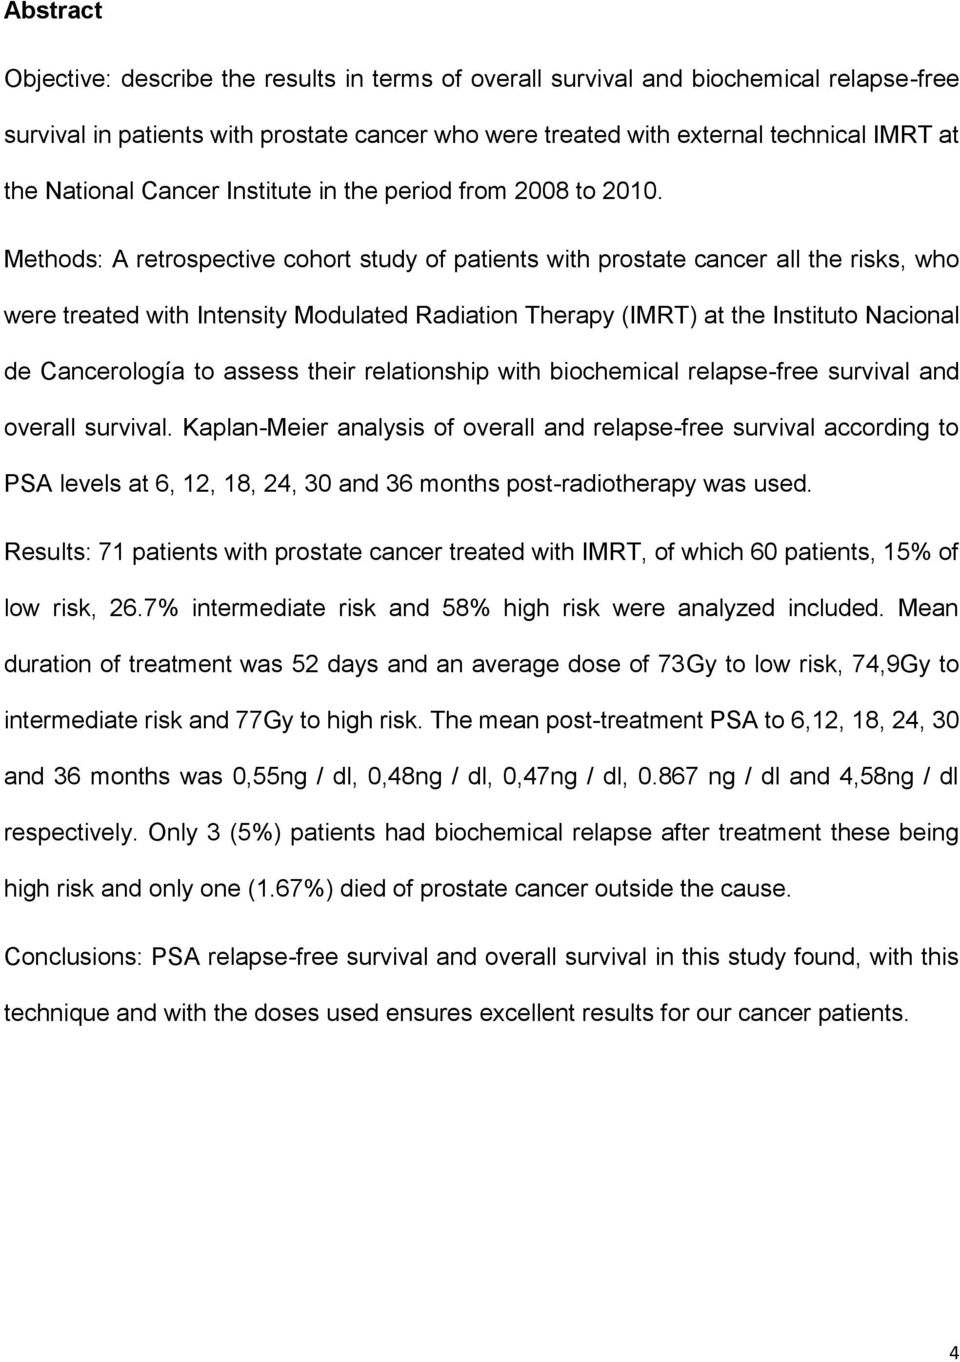 Methods: A retrospective cohort study of patients with prostate cancer all the risks, who were treated with Intensity Modulated Radiation Therapy (IMRT) at the Instituto Nacional de Cancerología to